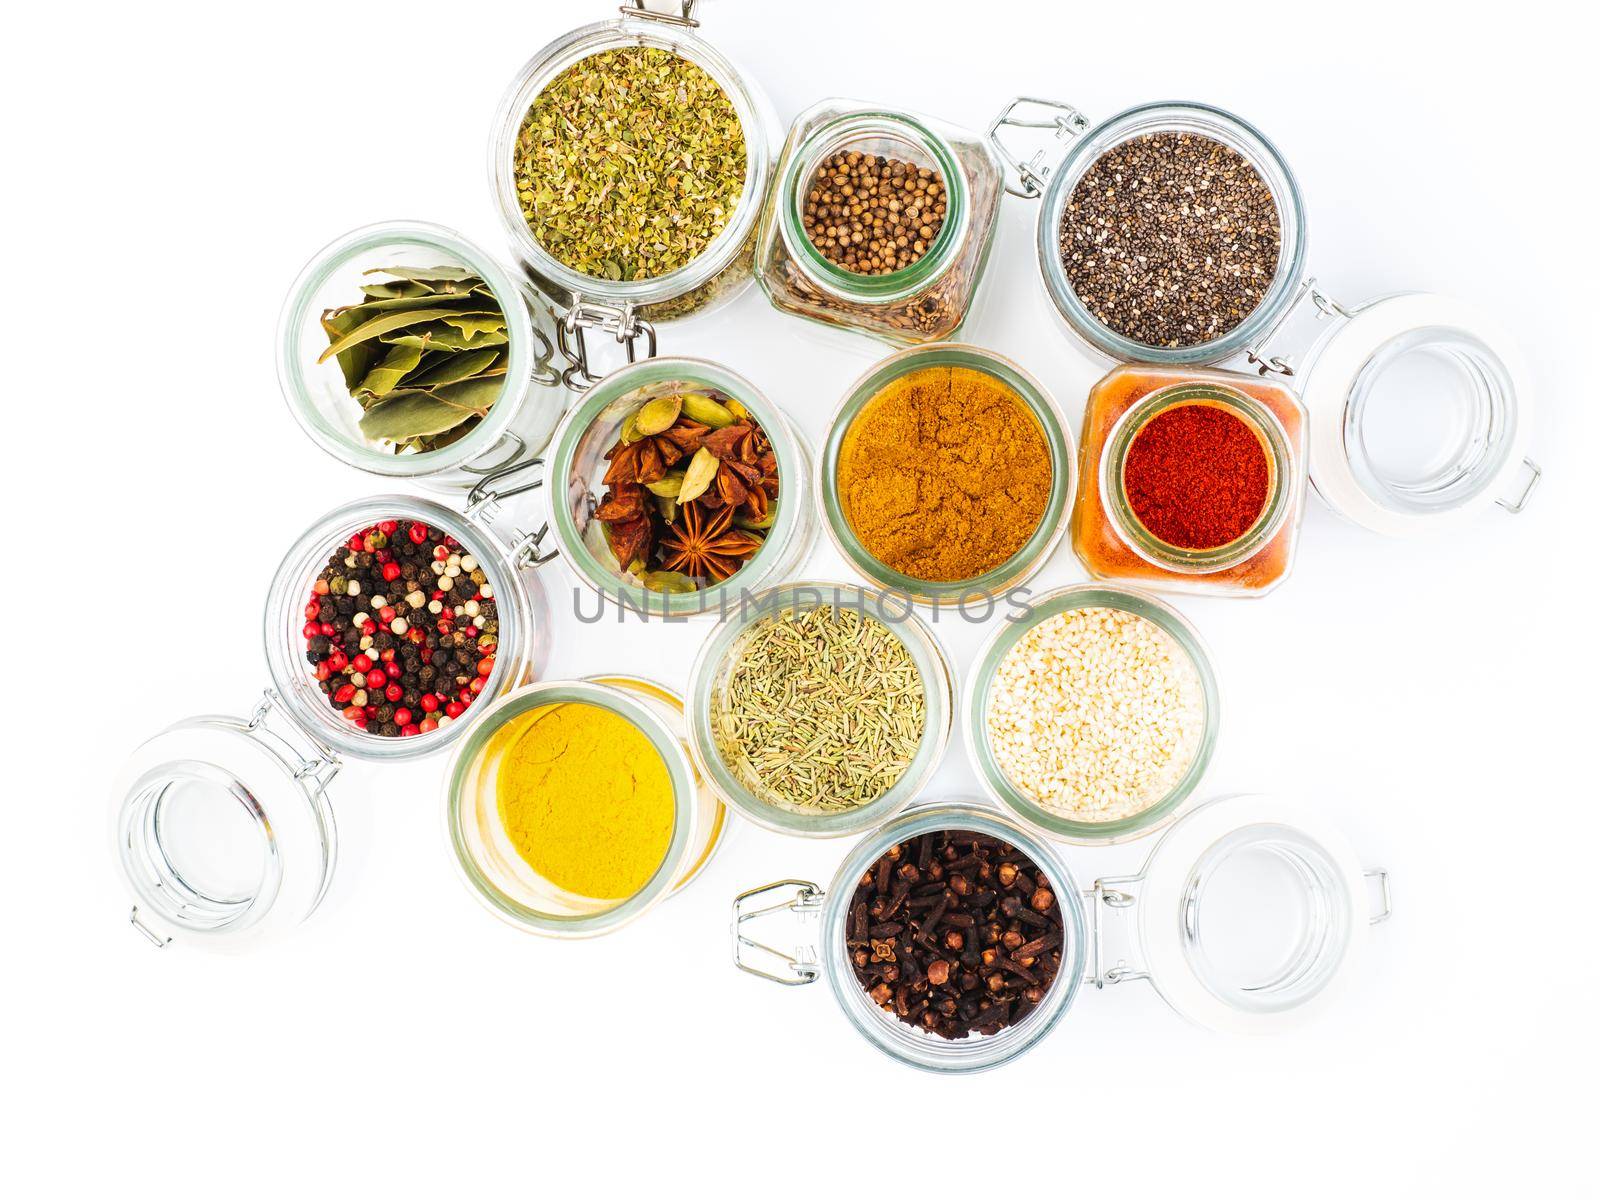 set of spices in glass jars on white background, top view. Paprika, curry, Bay leaf, anise and other seasonings.